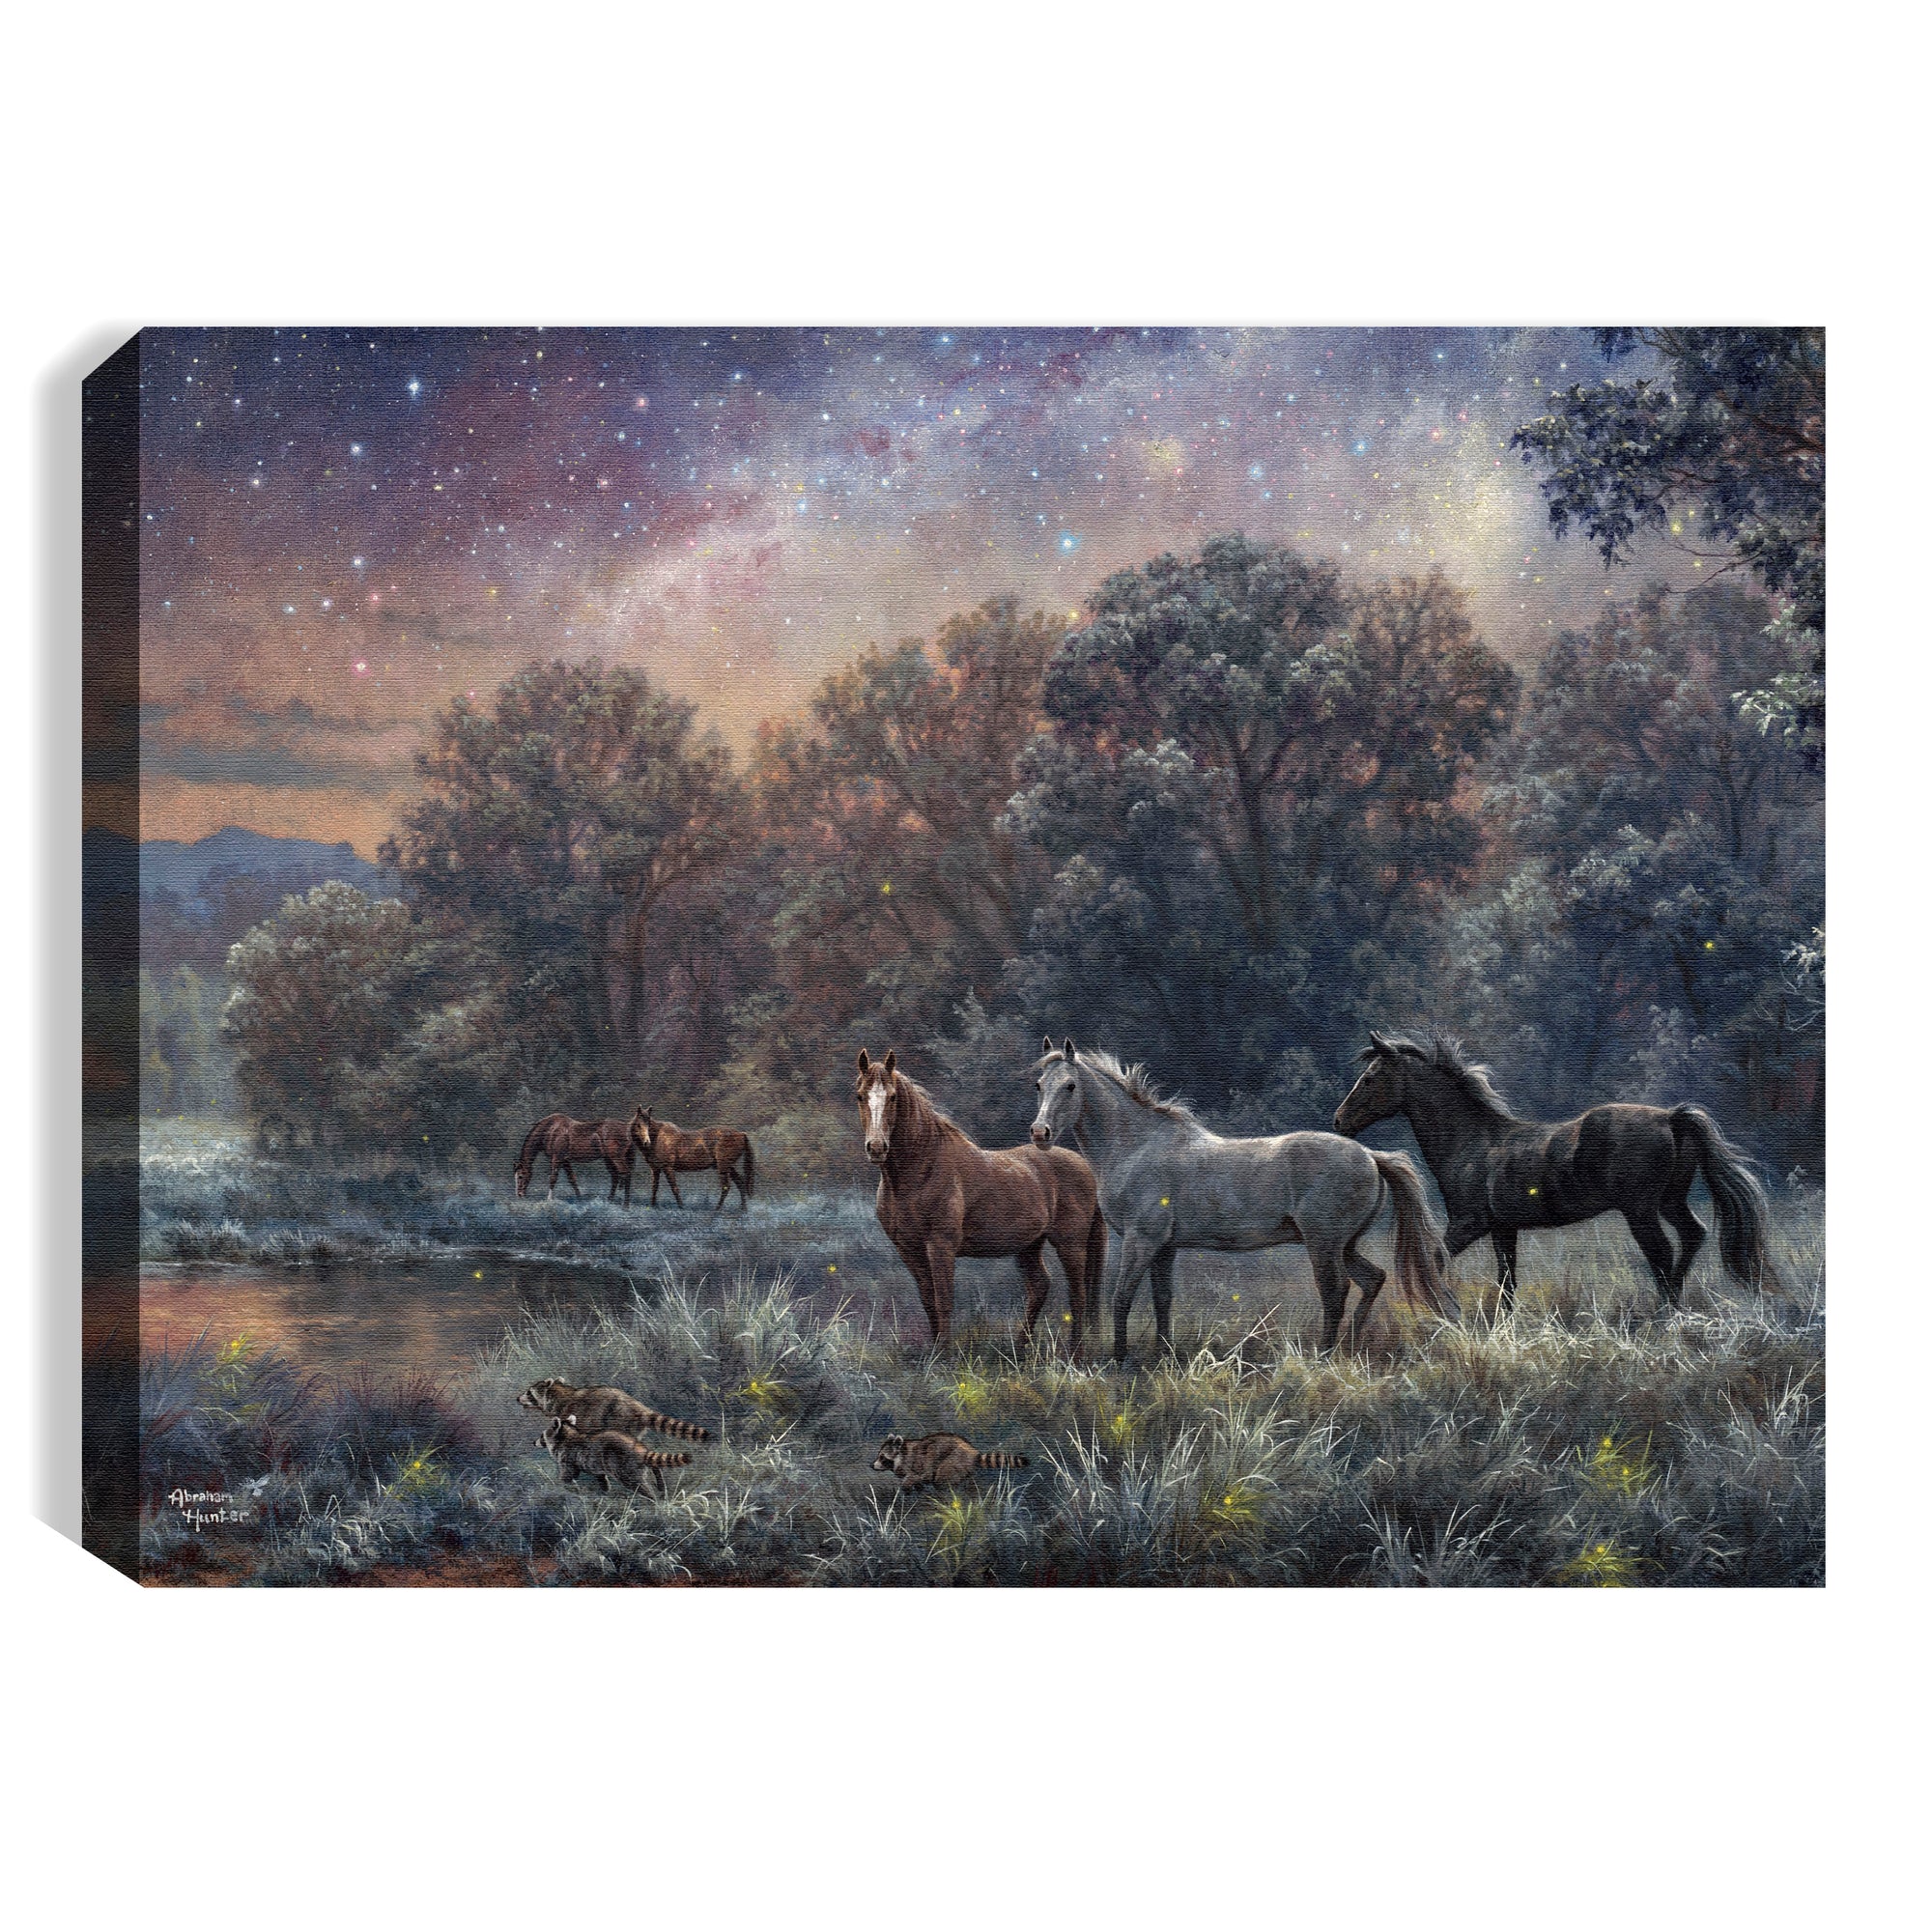 My Farm at Night 8x6 Lighted Tabletop Canvas